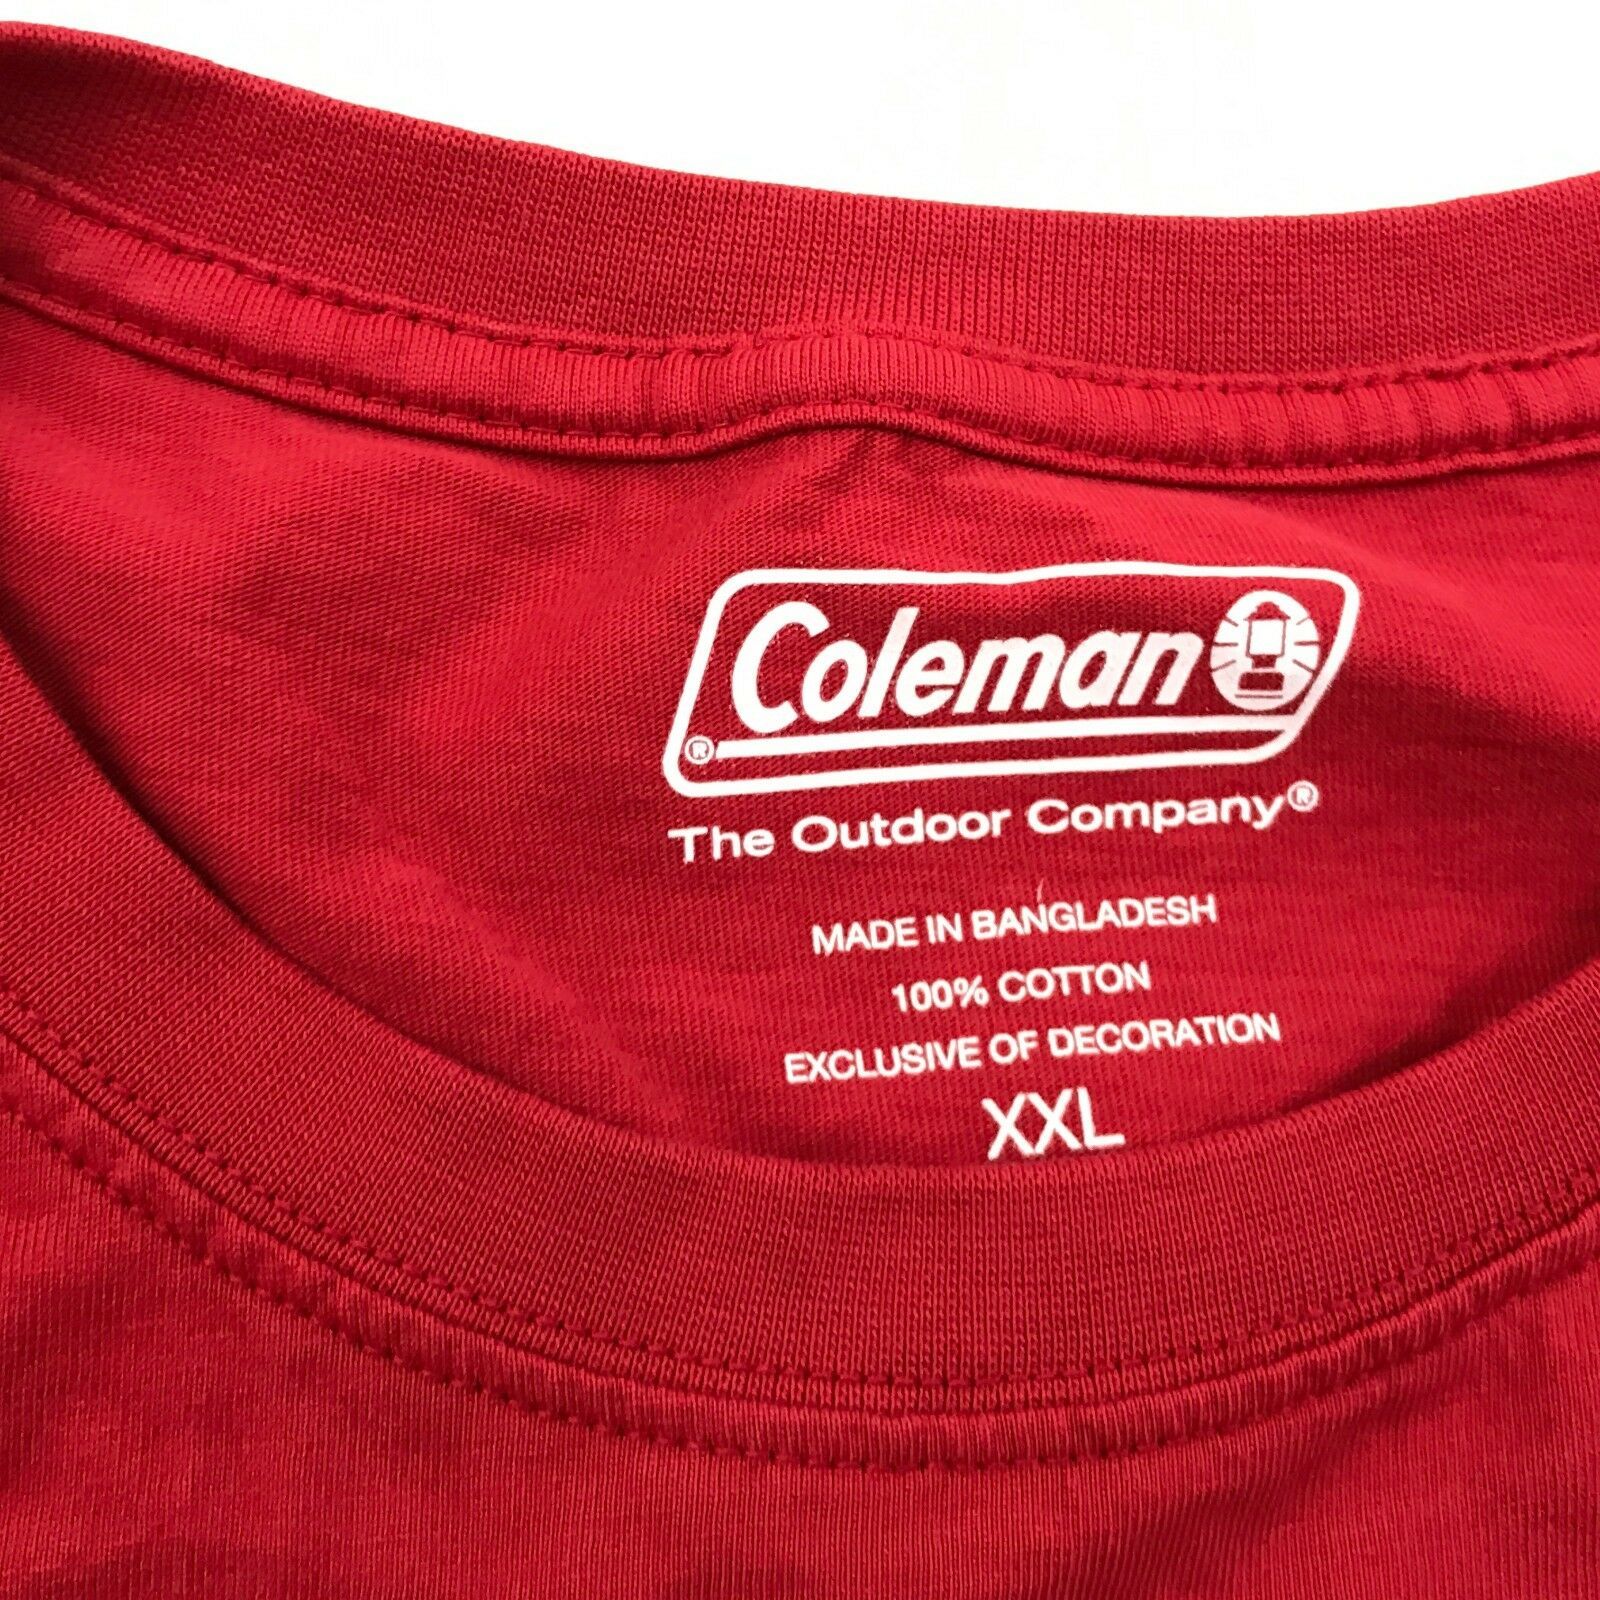 NEW Coleman Mens 2XL XXL Tshirt Loose Fit Red Short Sleeve Outdoor ...